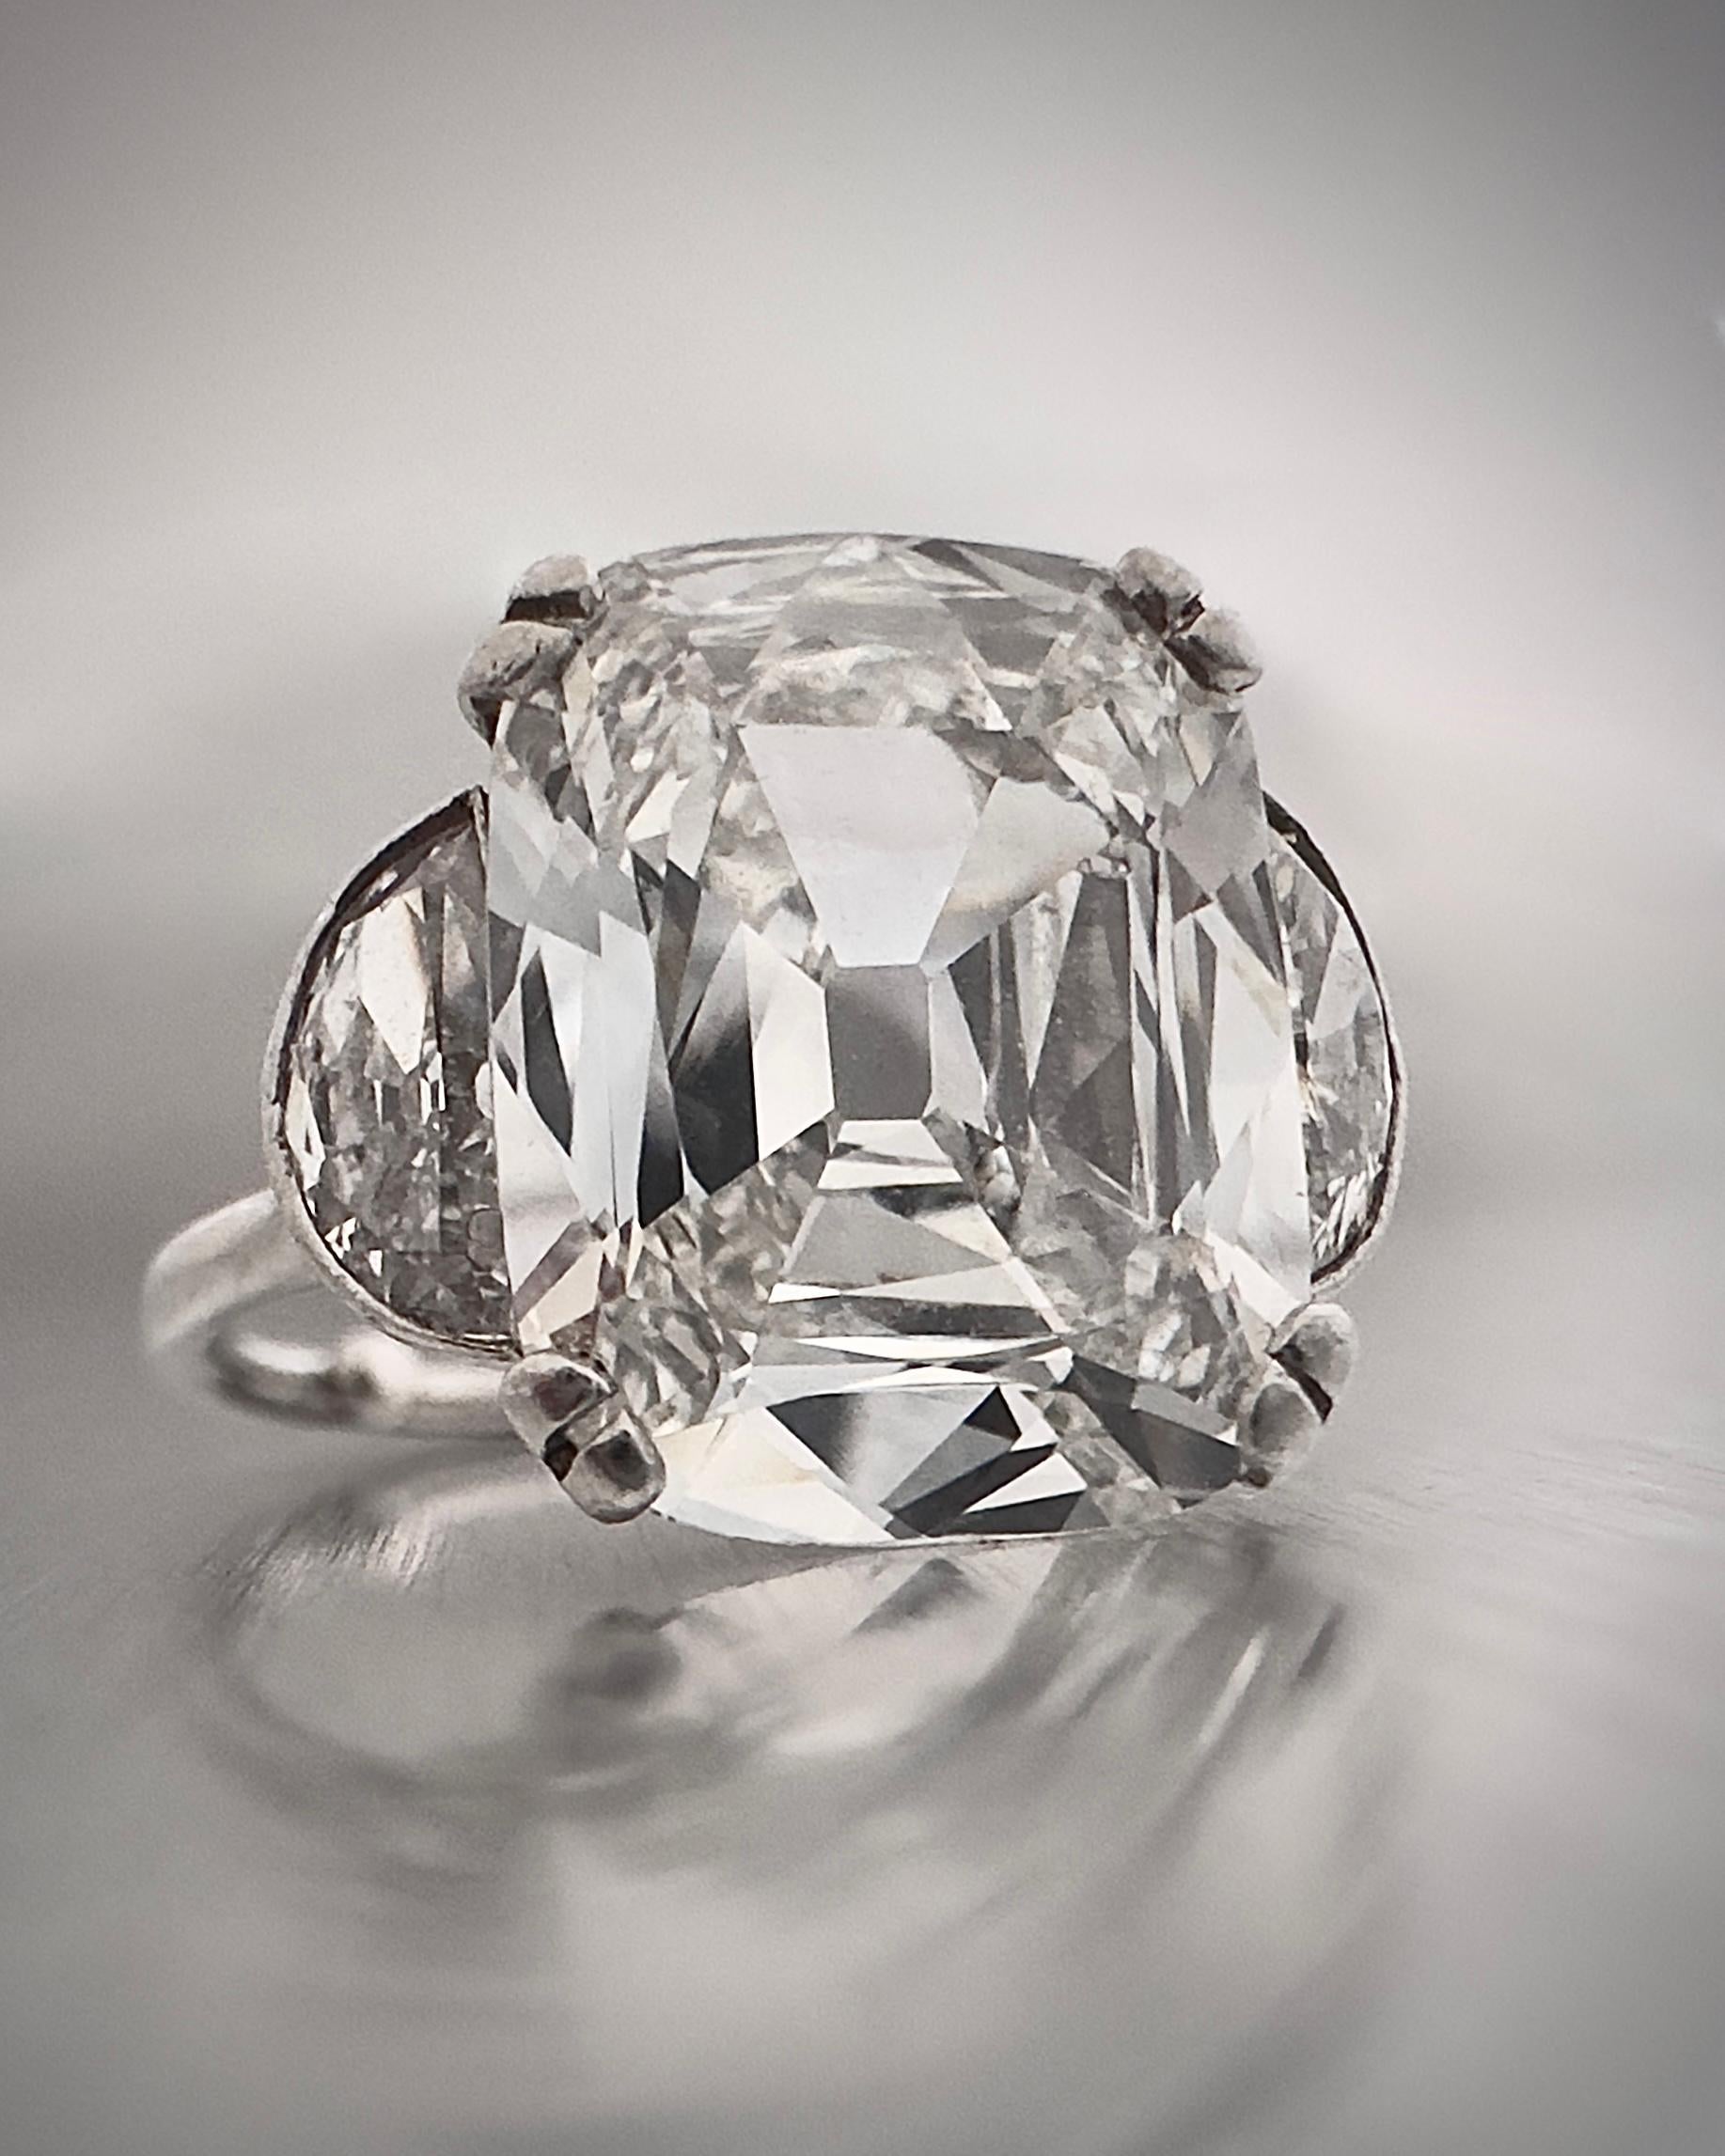 Art Deco, Antique Cushion Cut Diamond Ring, C. 1920
Extremely rare diamond ring, due to the High quality cut for the art deco period and the beautiful Antique Half-Moon diamonds (0.45 carat each)  platinum setting.
(US 5), resizable. GIA report N°